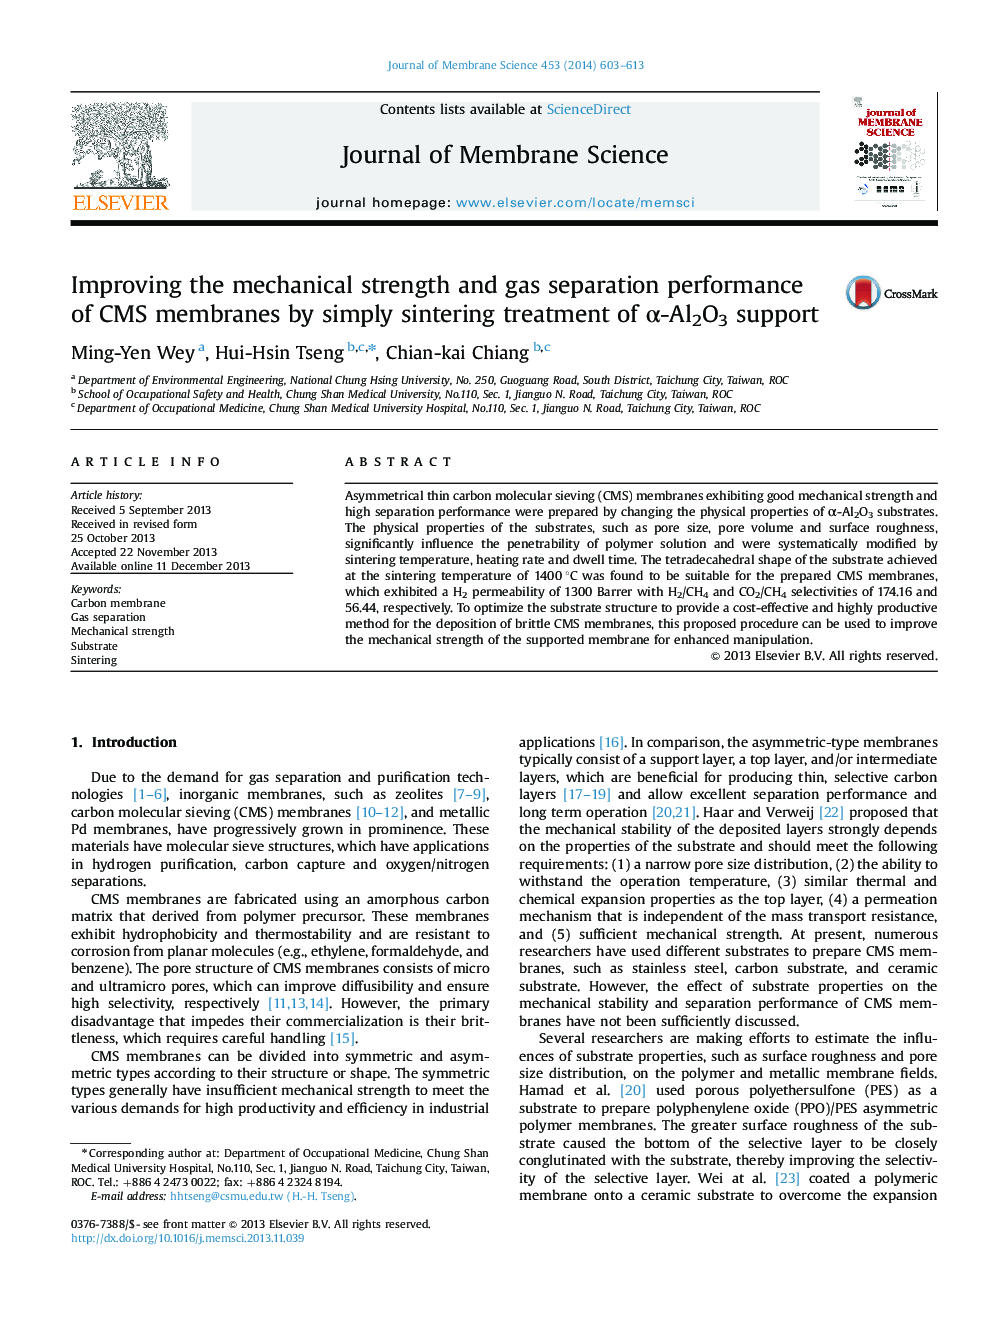 Improving the mechanical strength and gas separation performance of CMS membranes by simply sintering treatment of α-Al2O3 support